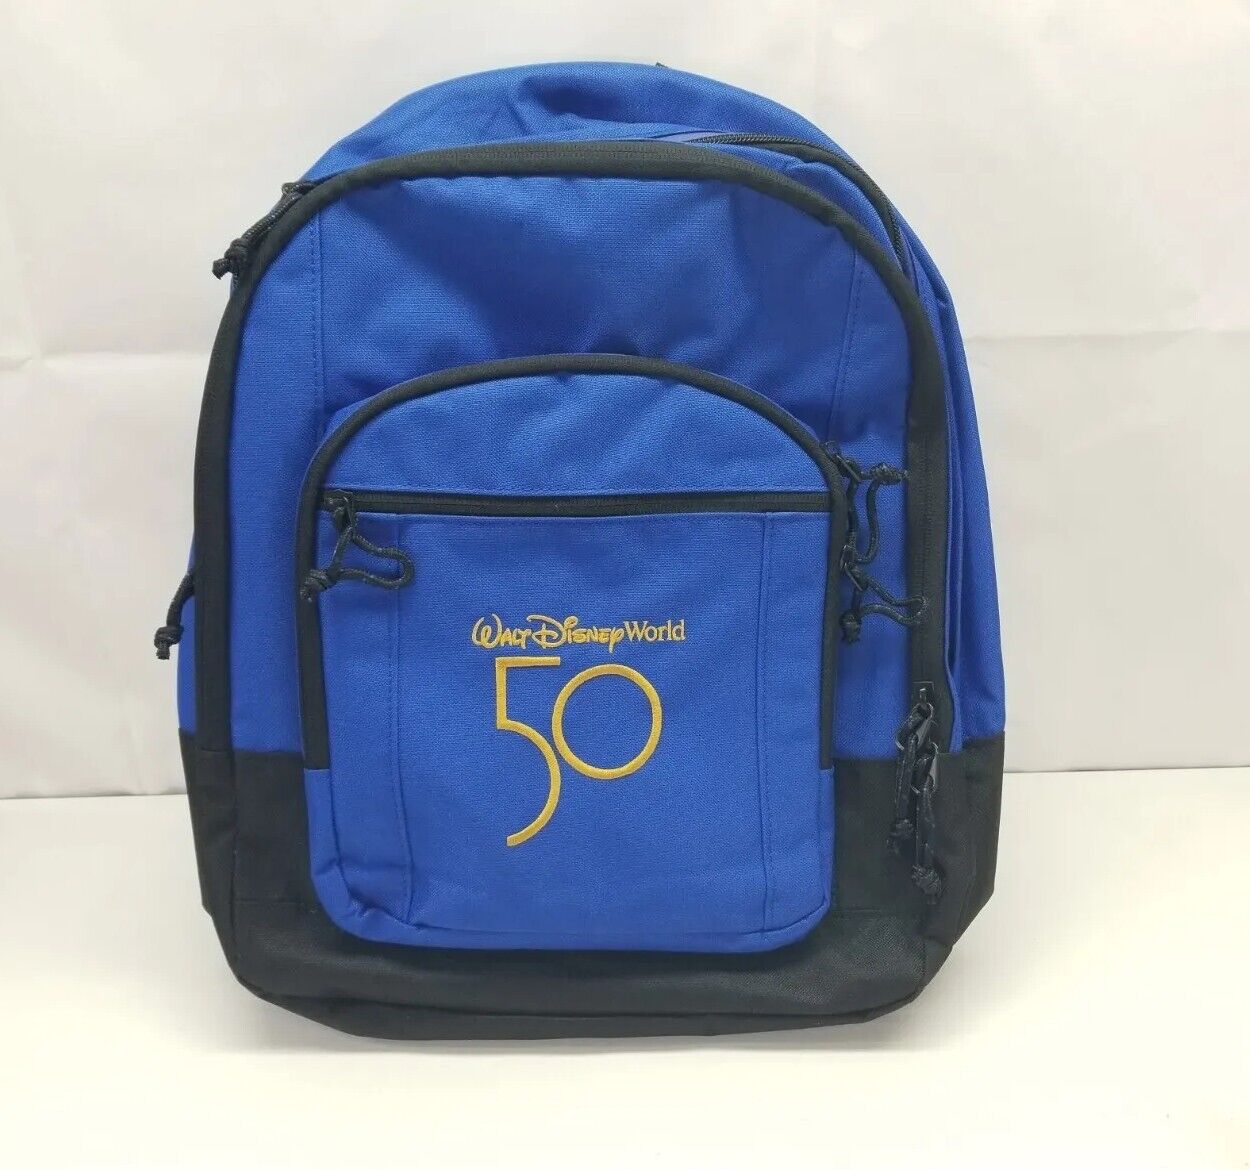 Walt Disney World 50 Anniversary Backpack New Without Tags